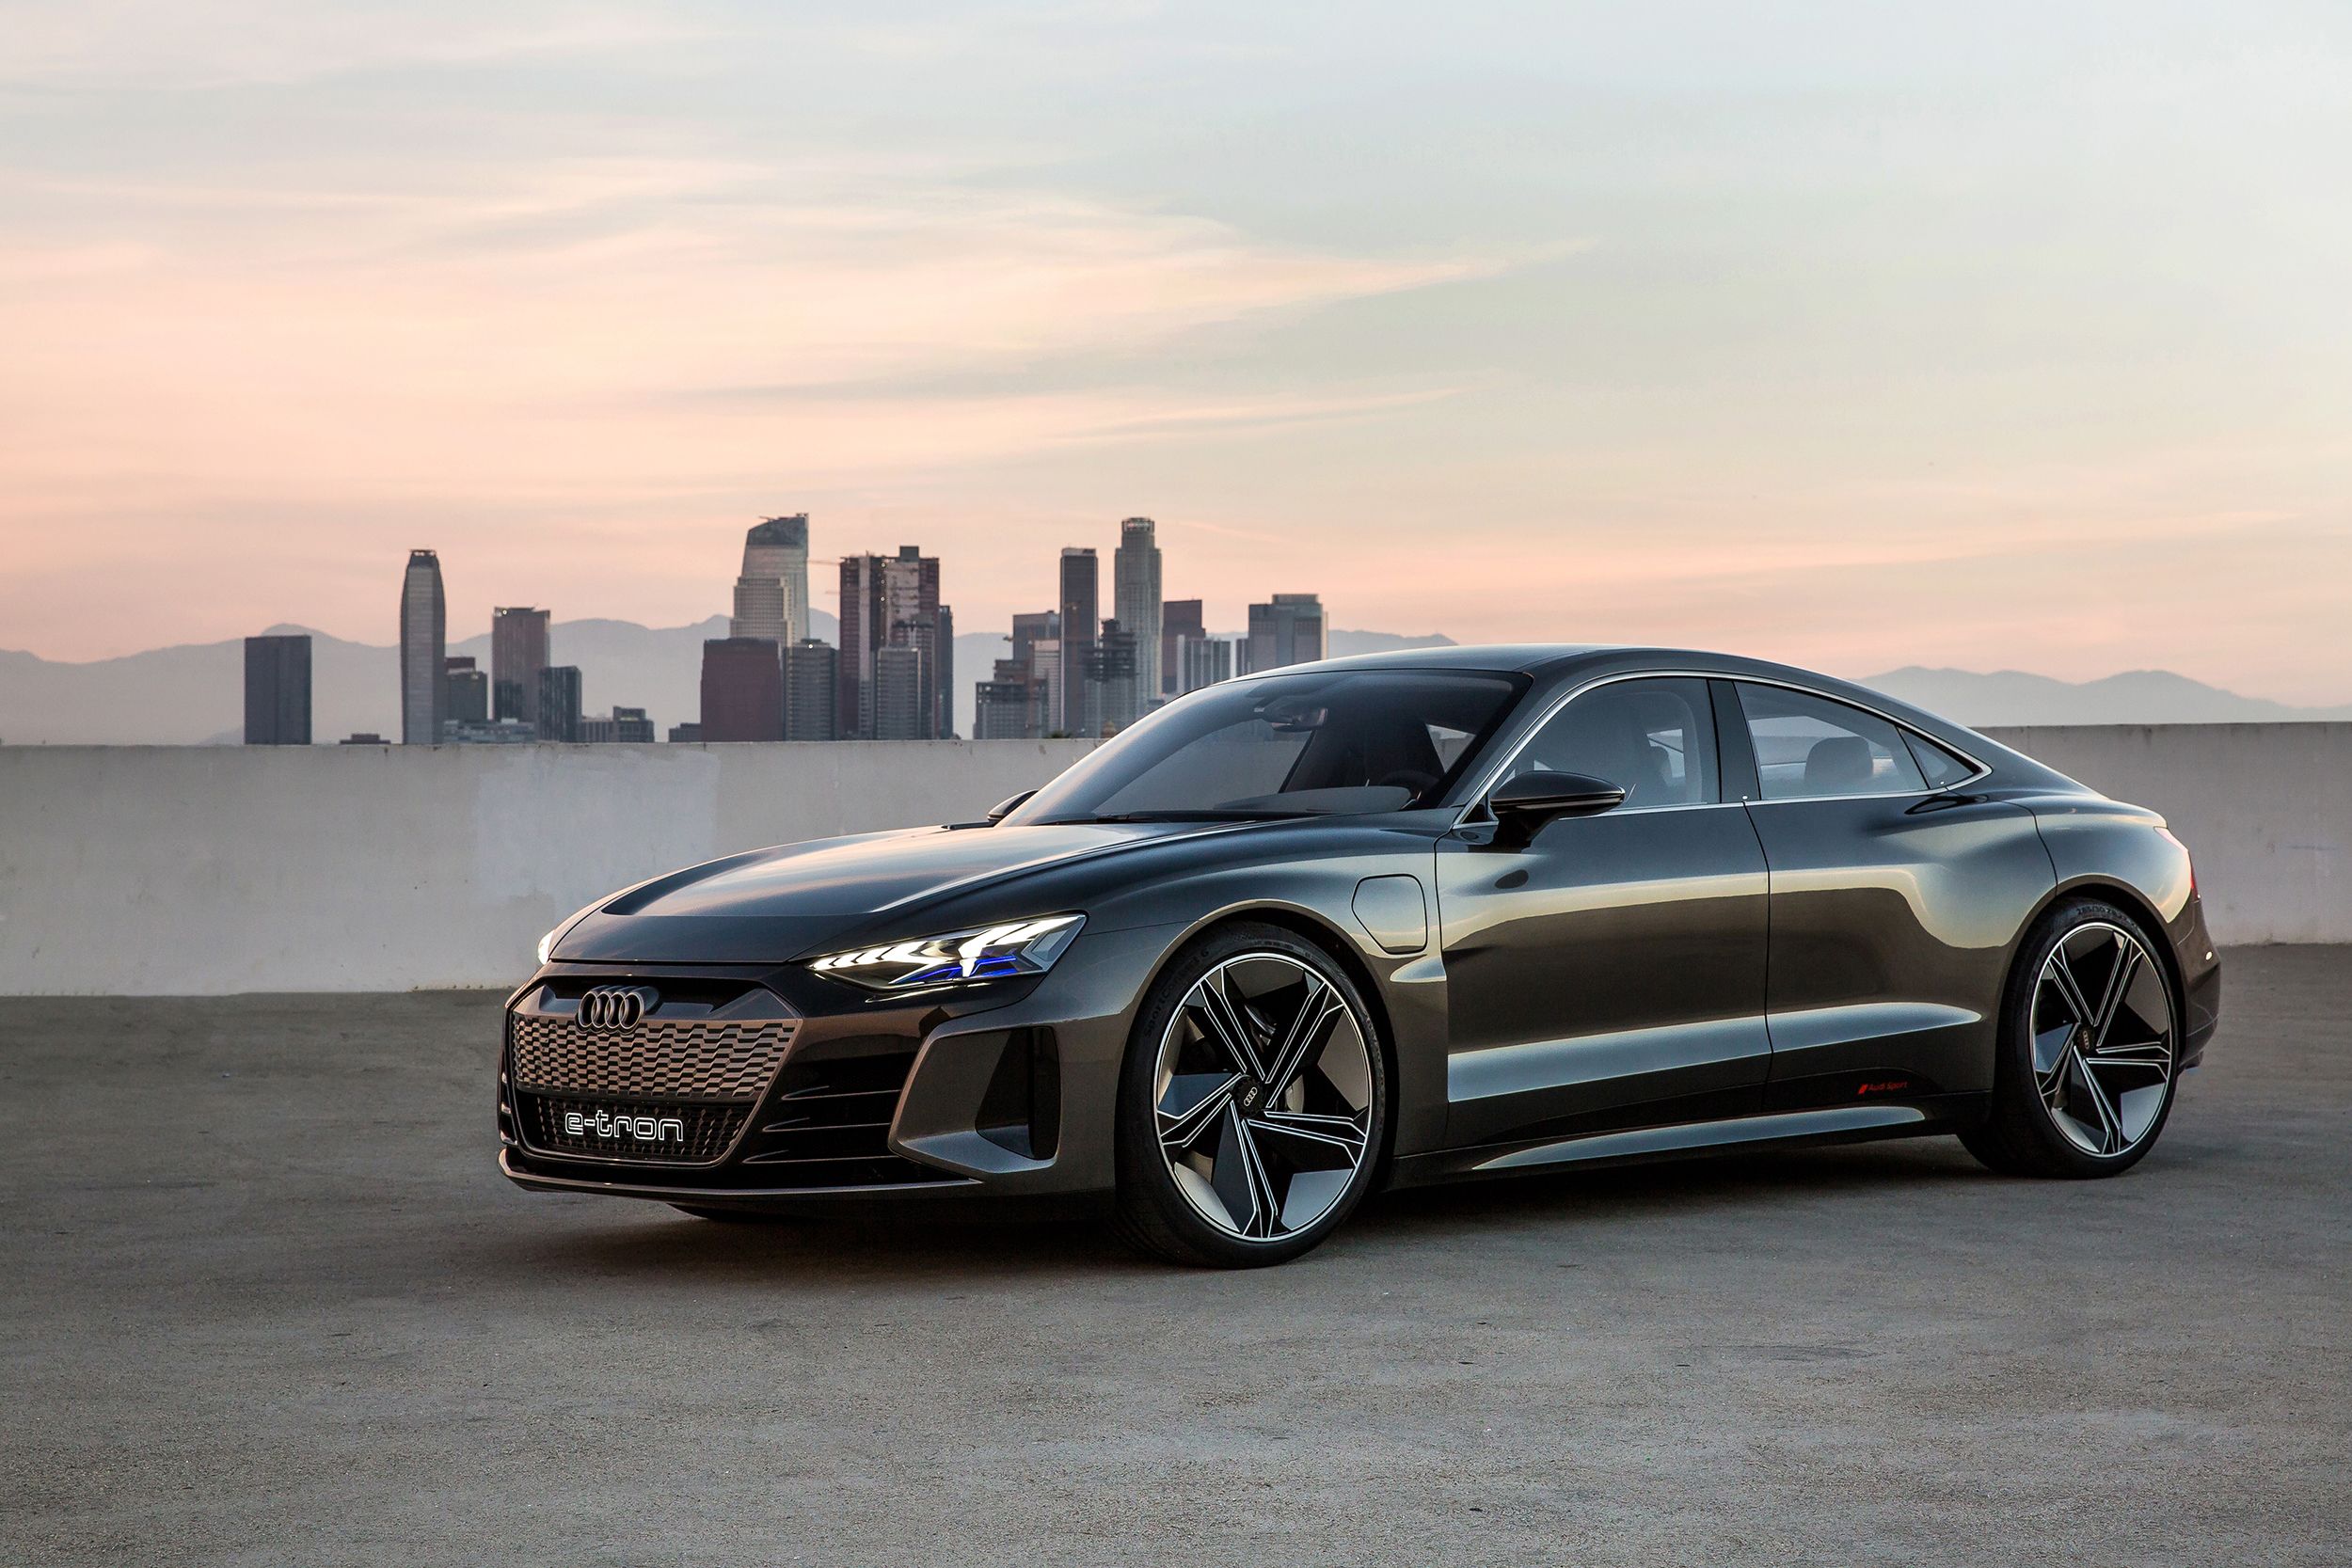 Audi reveals the E-Tron GT. Its new all-electric sports car